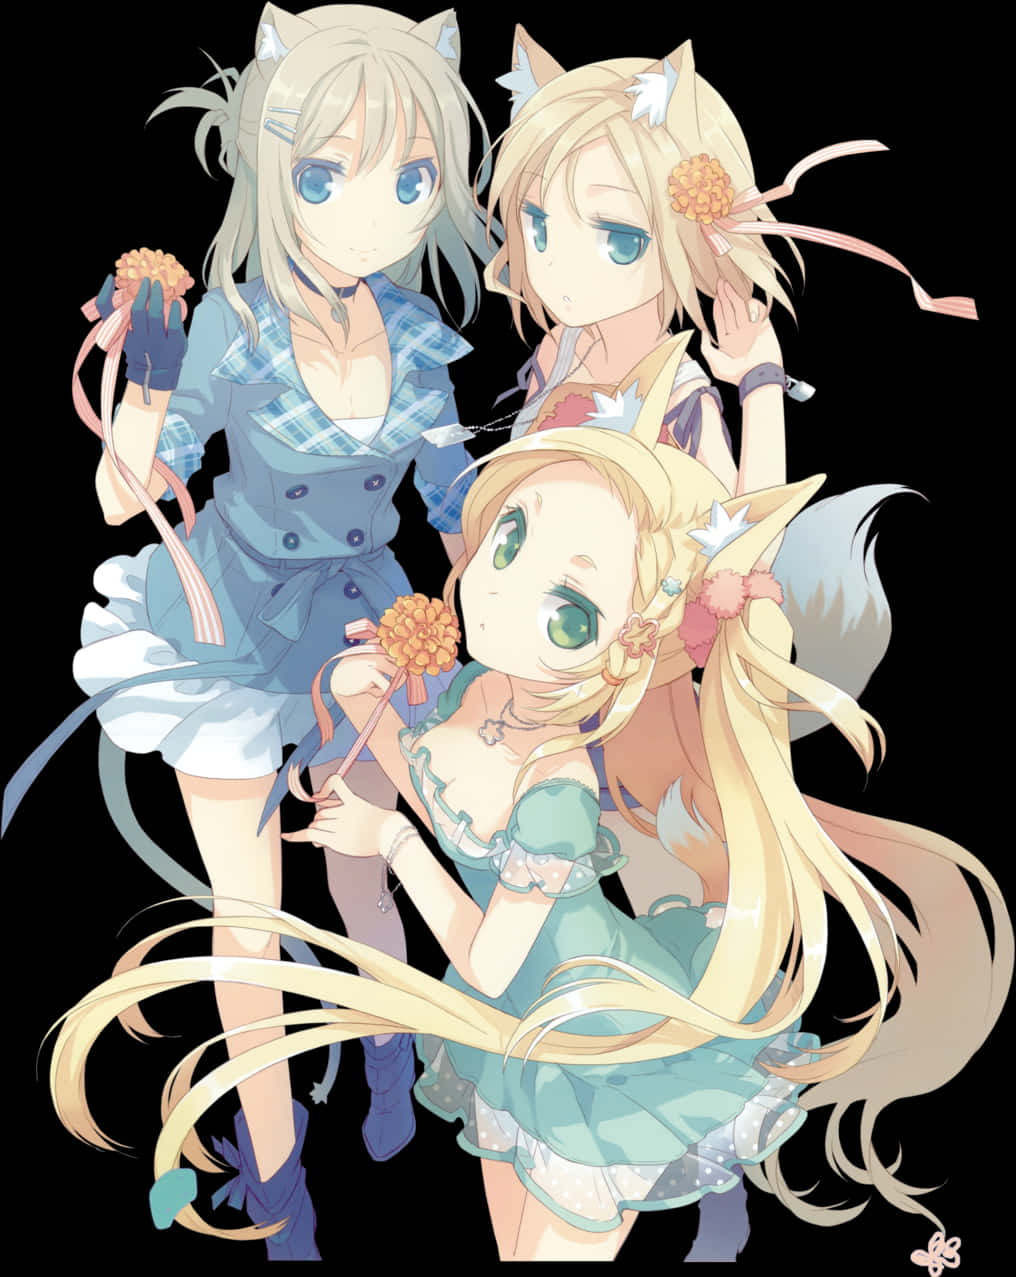 Anime Friends With Floral Accessories PNG image